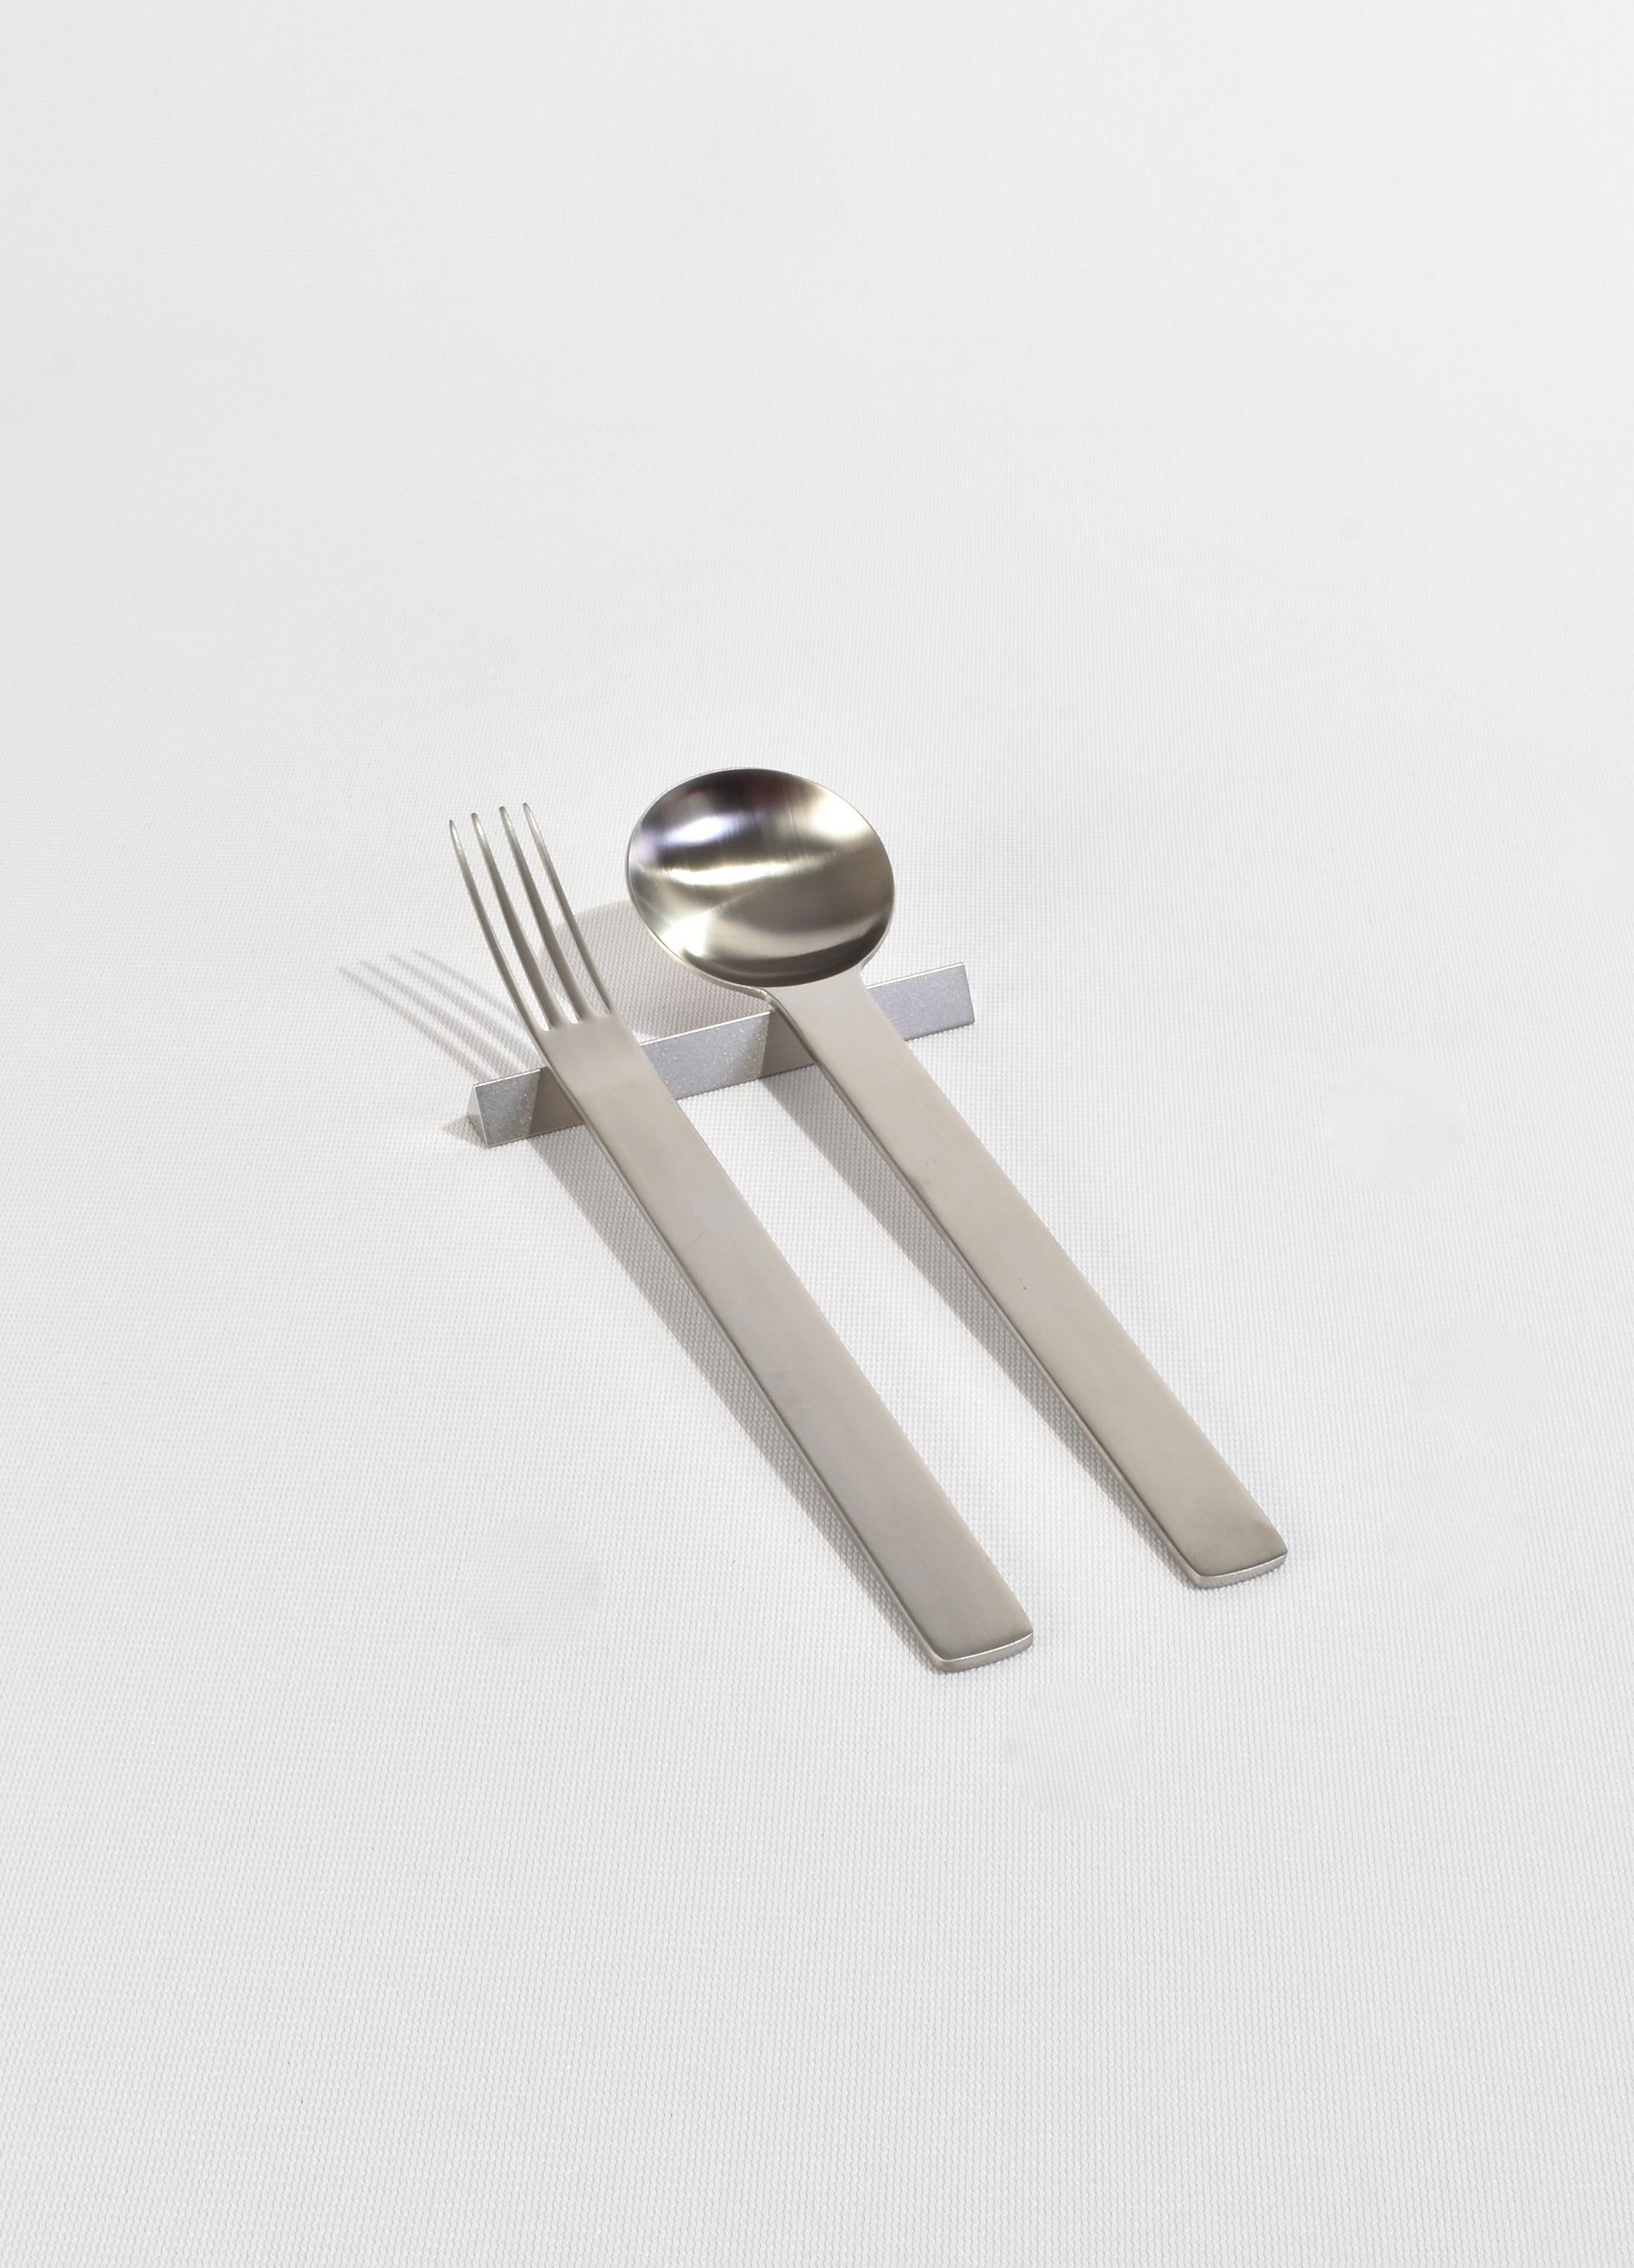 5-piece boxed cutlery set 'TI-1' by Japense designer Takenobu Igarashi, ca. 1990. Made from lightweight 18/10 stainless steel in a matte finish, the series is finished by 40-50 production processes combining human hand and machinery. Each piece is